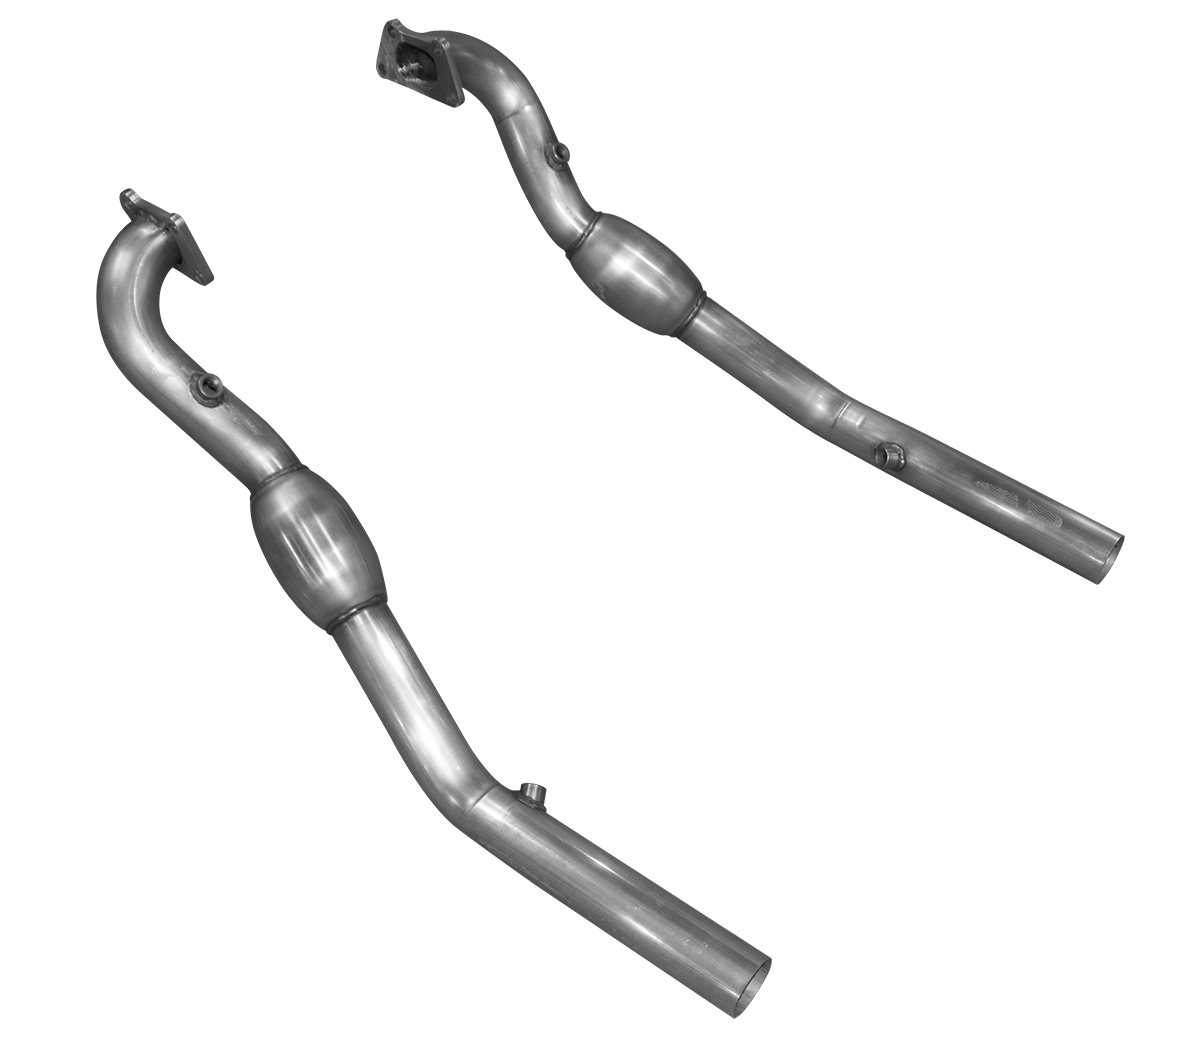 2012+ Camaro V6 American Racing Headers 2 1/2" Downpipes w/2 1/2" Offroad Hpipe & Pure Thunder Catback